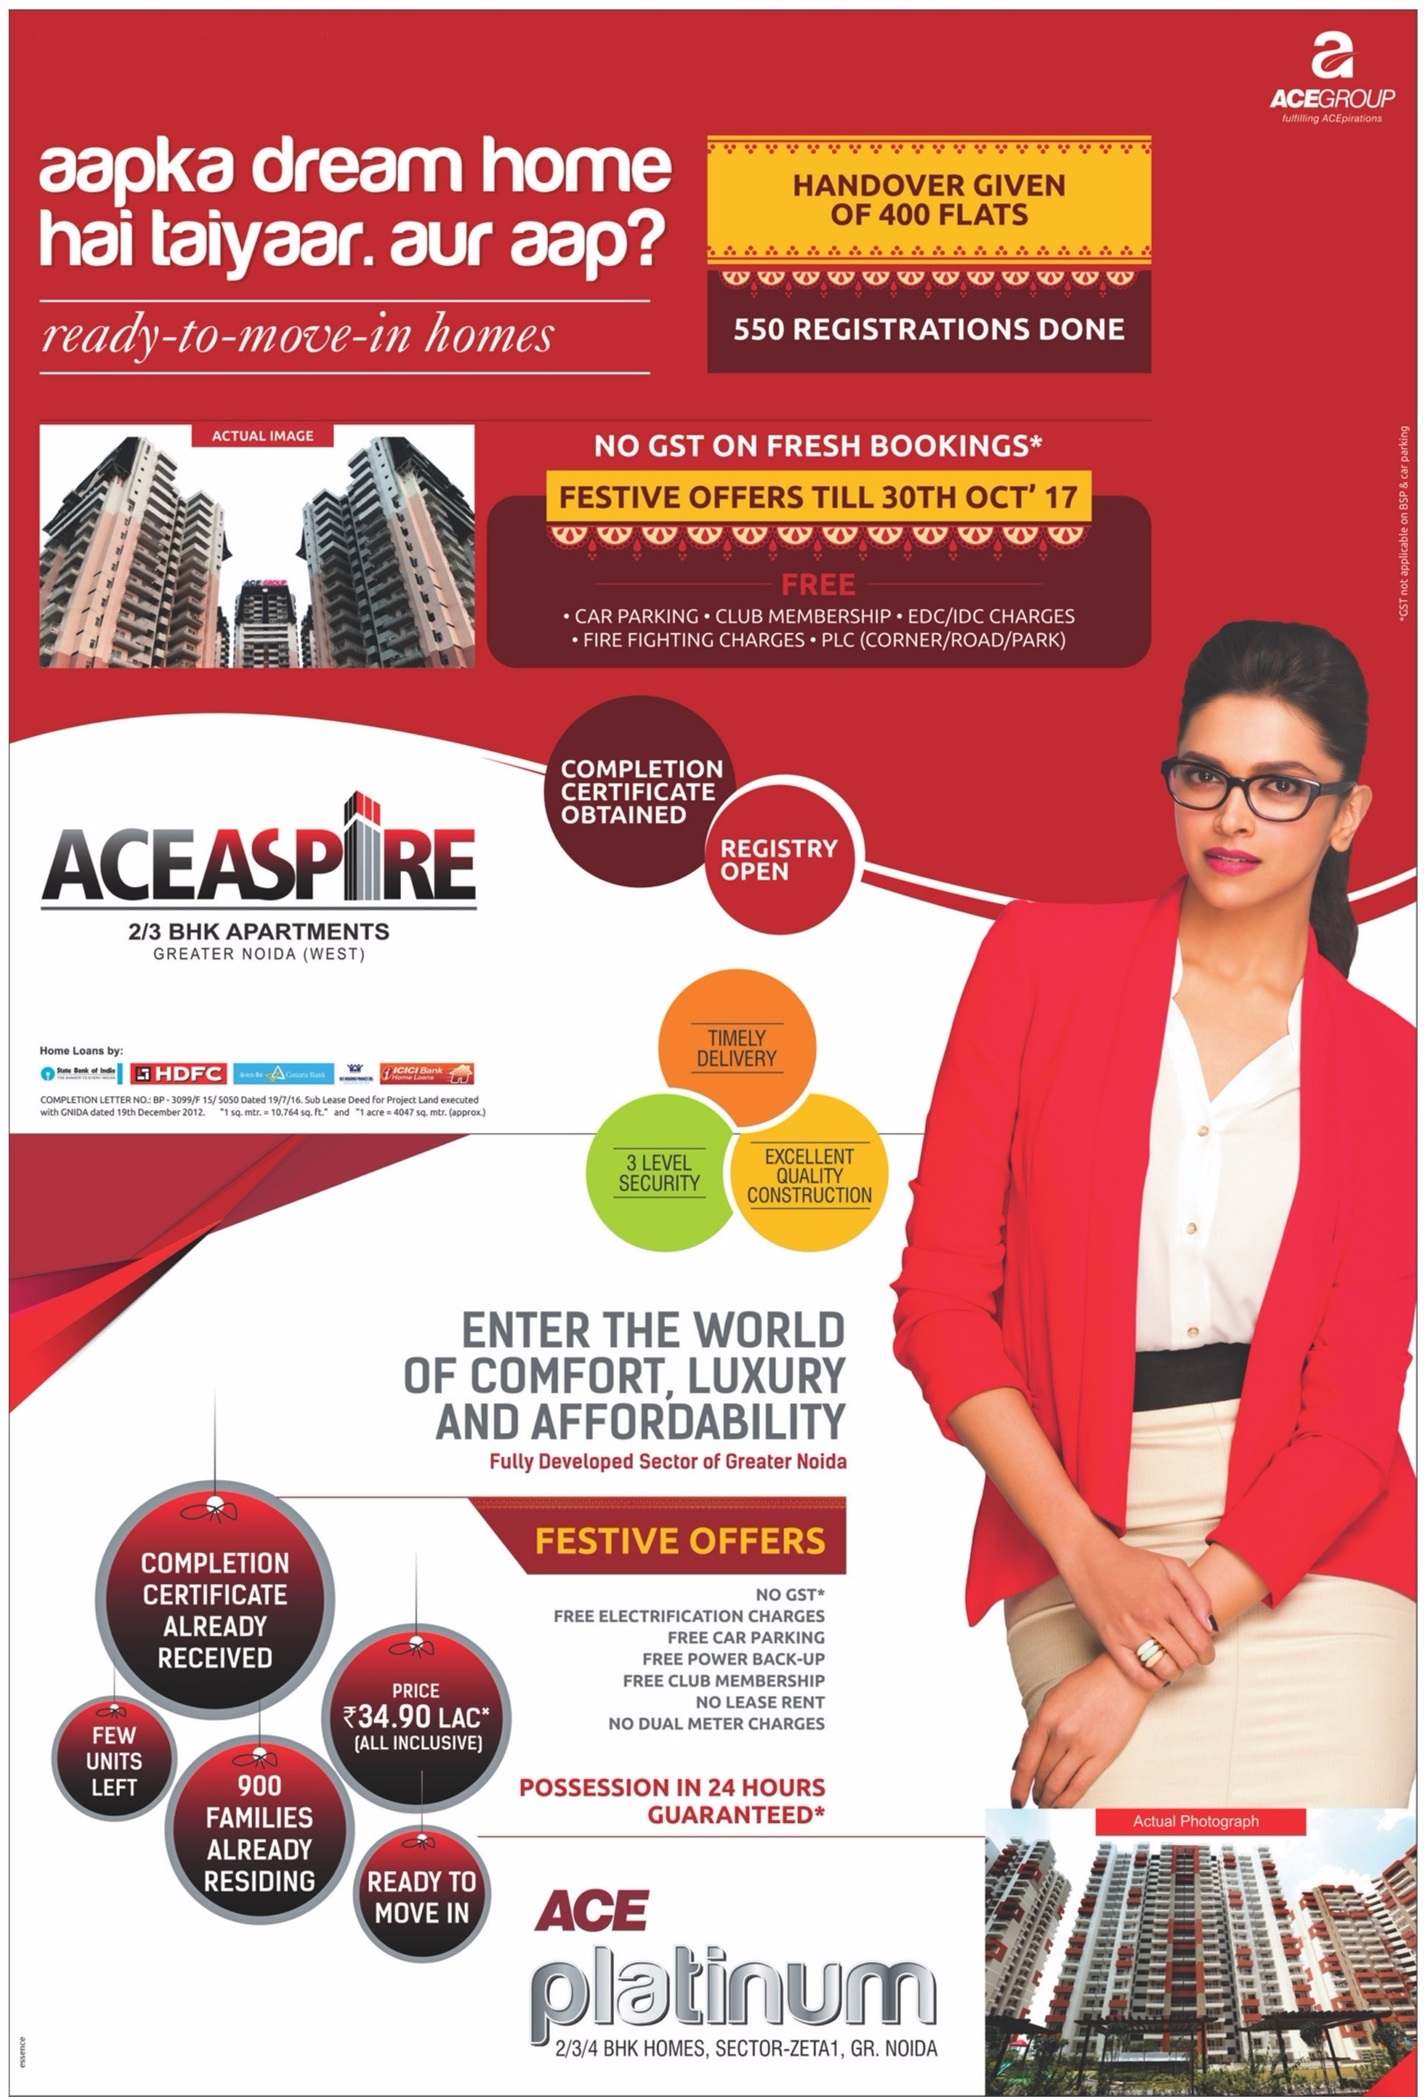 Enter the world of comfort, luxury & affordability by residing at Ace Group's Properties in Greater Noida